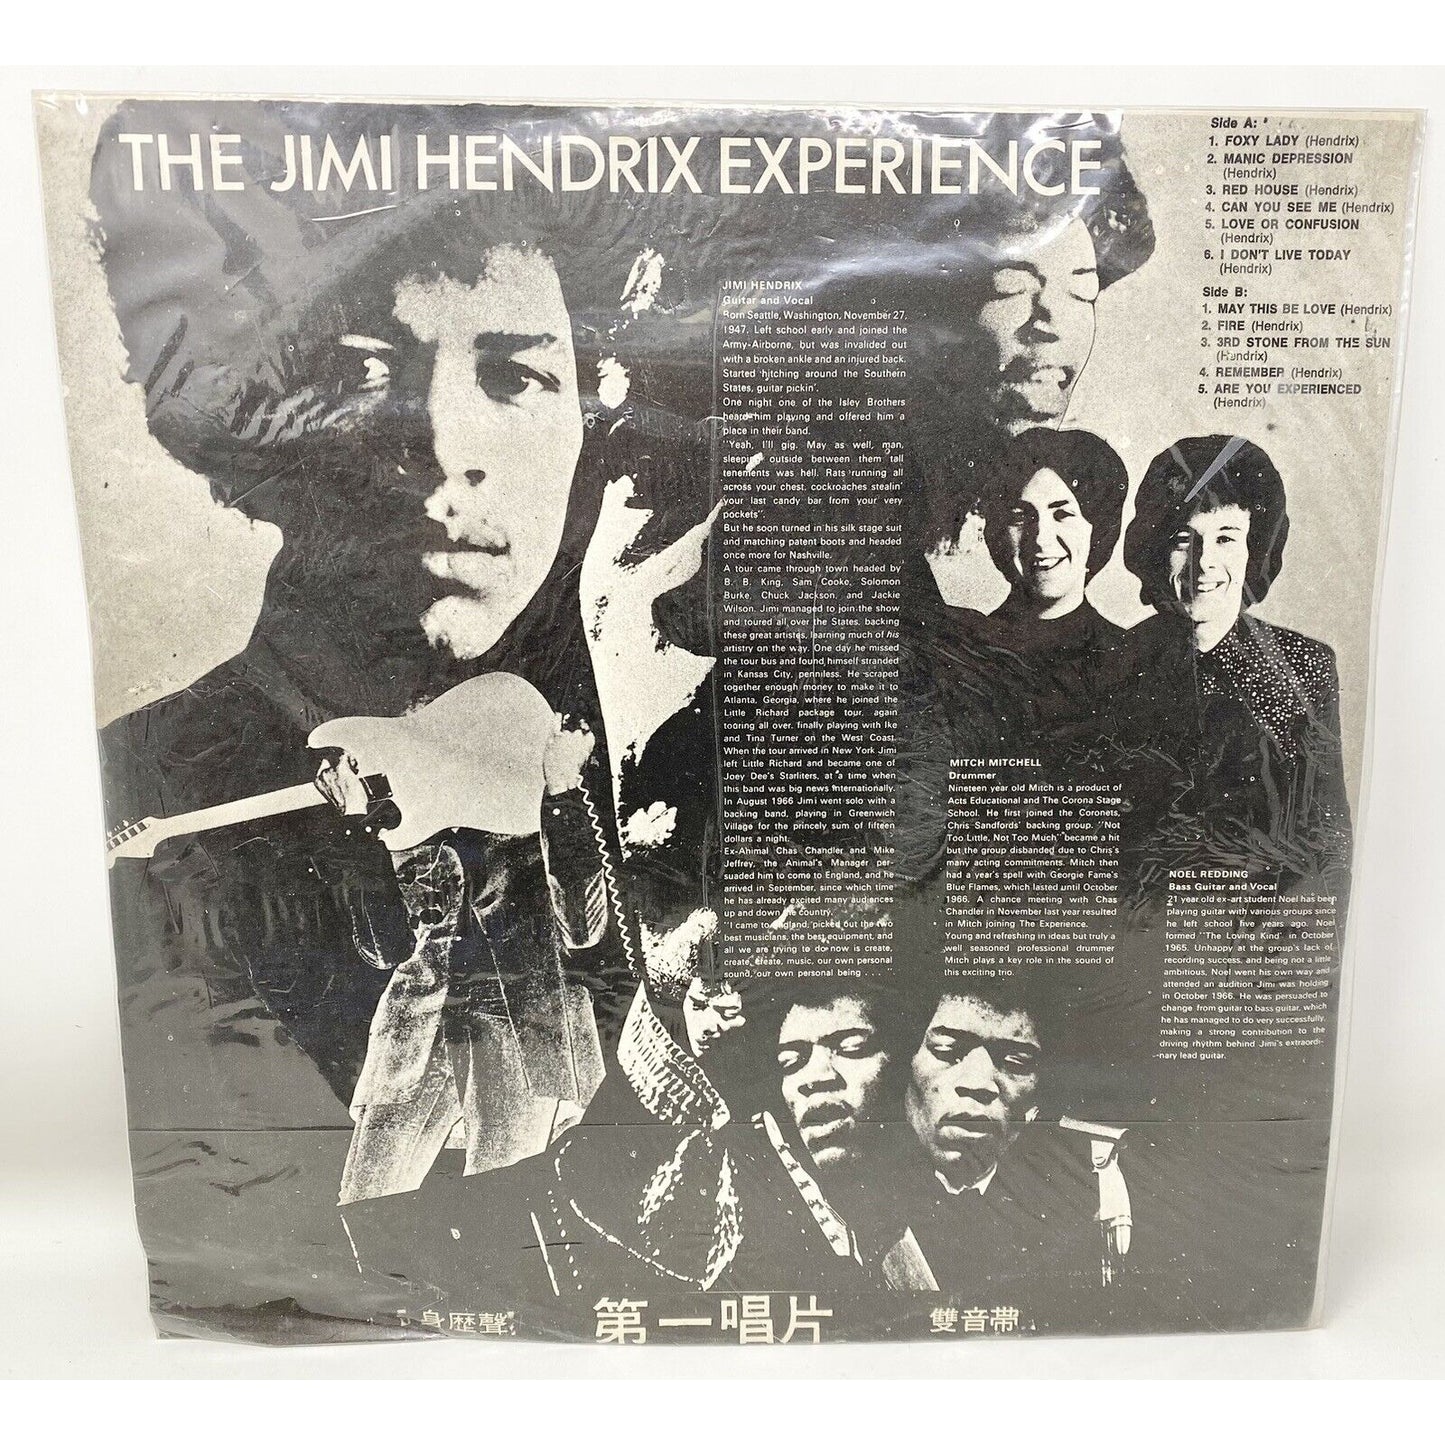 The Jimi Hendrix Experience Are You Experienced Taiwan First Record Vinyl 12" LP